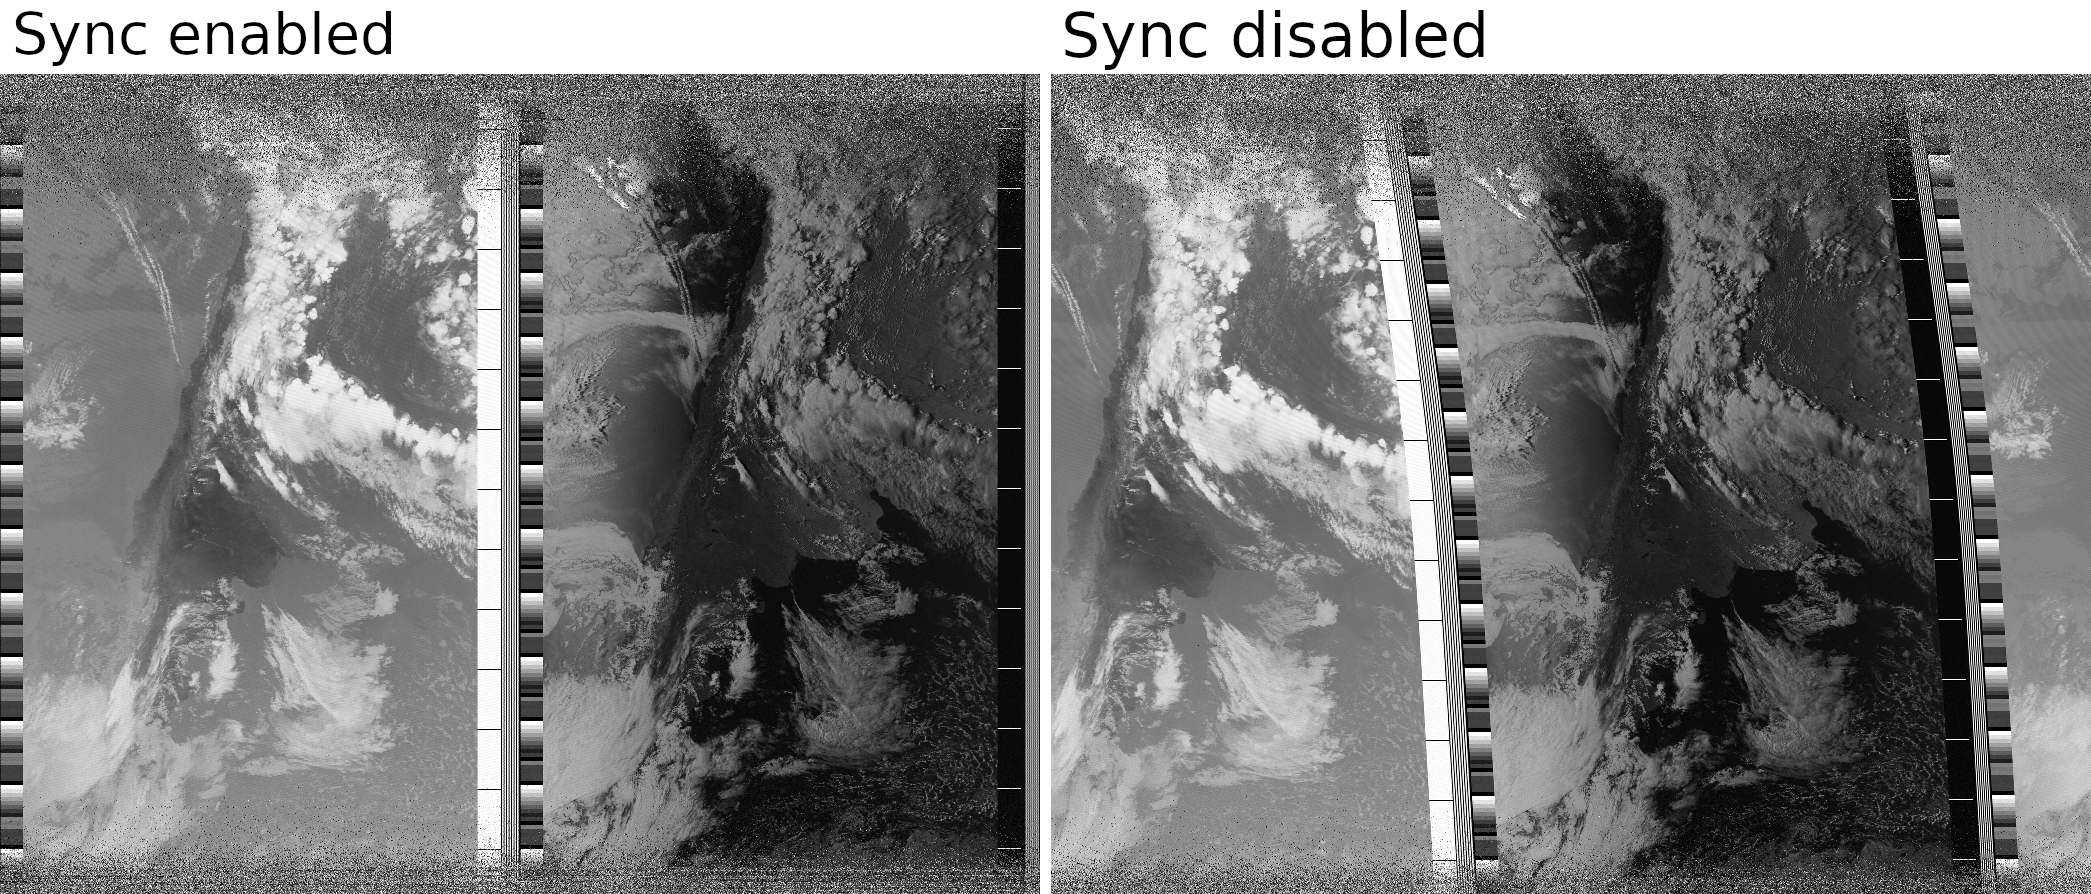 Comparison between synced and not synced image